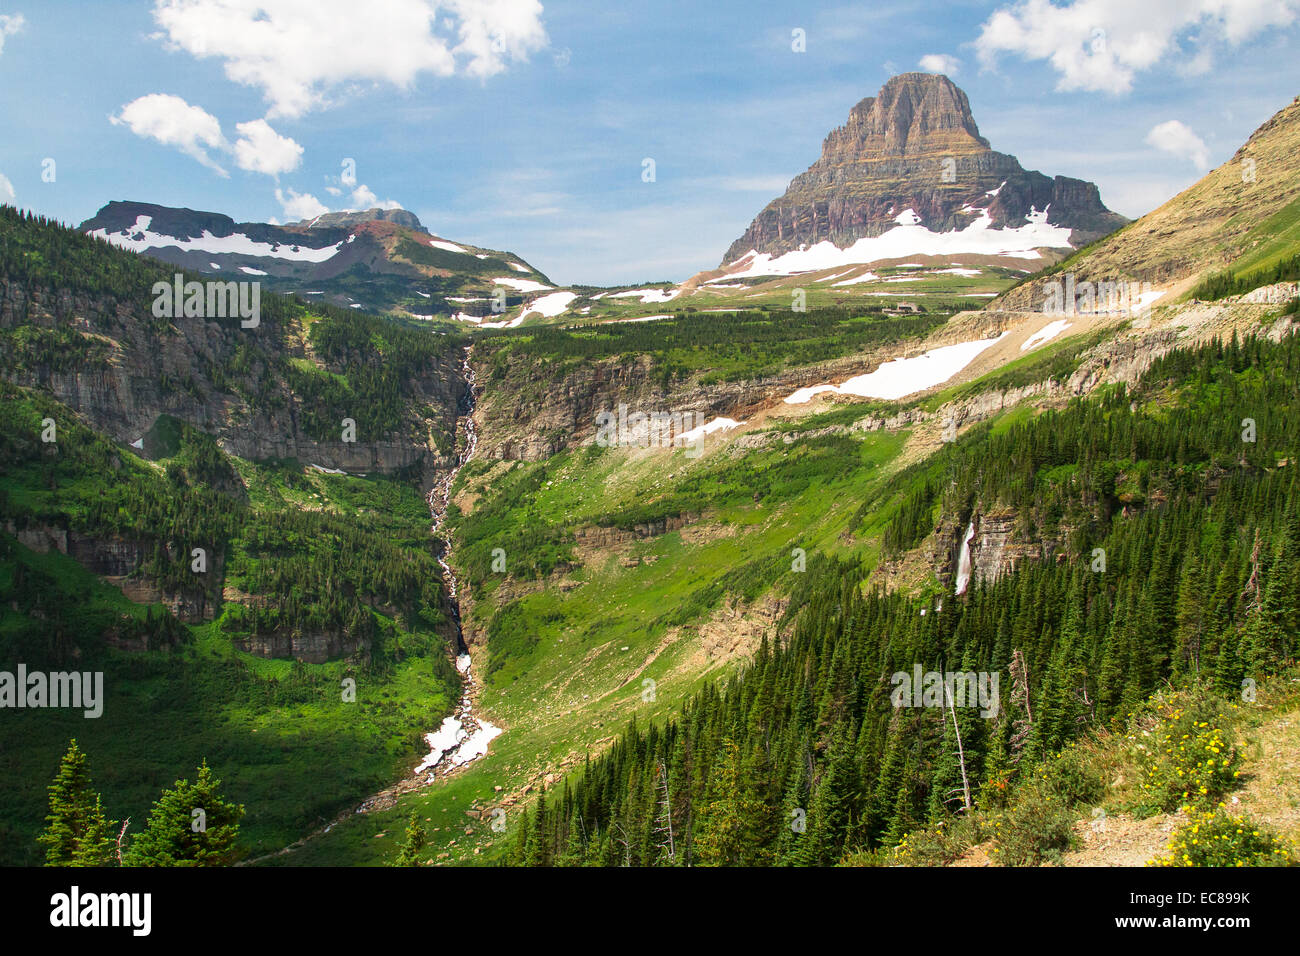 Clements Mountain and Scenery in Glacier National Park, Montana, USA Stock Photo